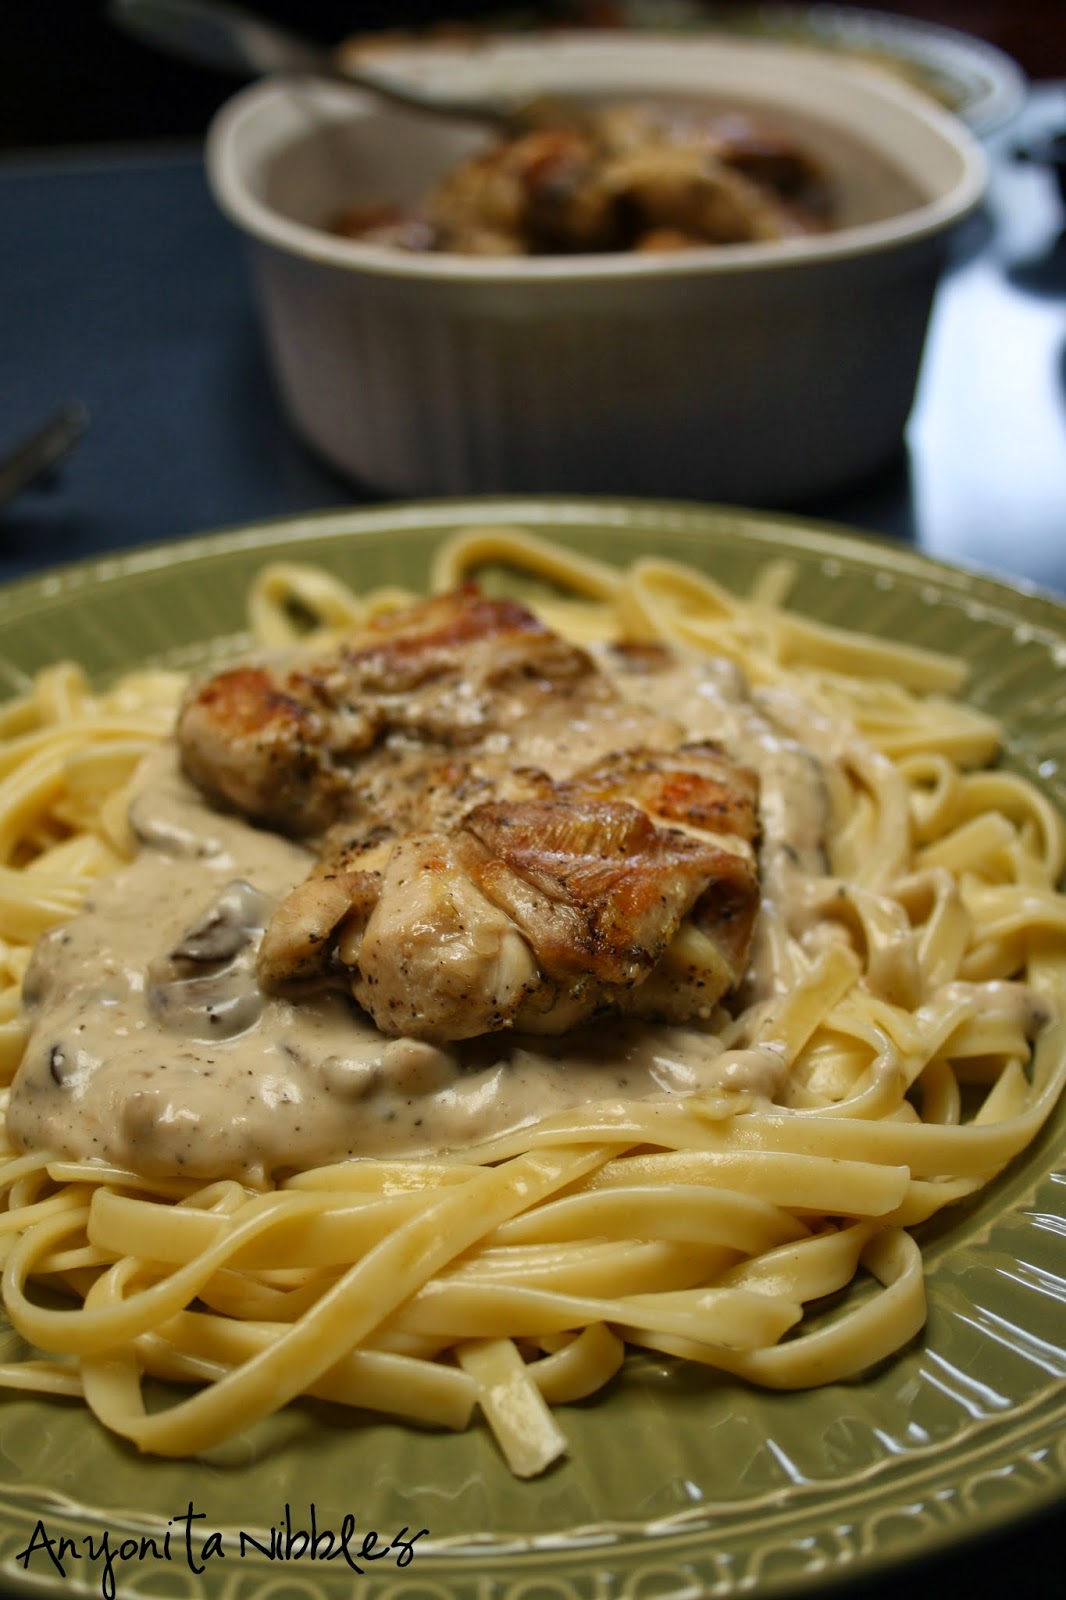 Succulent grilled chicken marinated in sagewith a 10 minute mushroom sauce from www.anyonita-nibbles.com